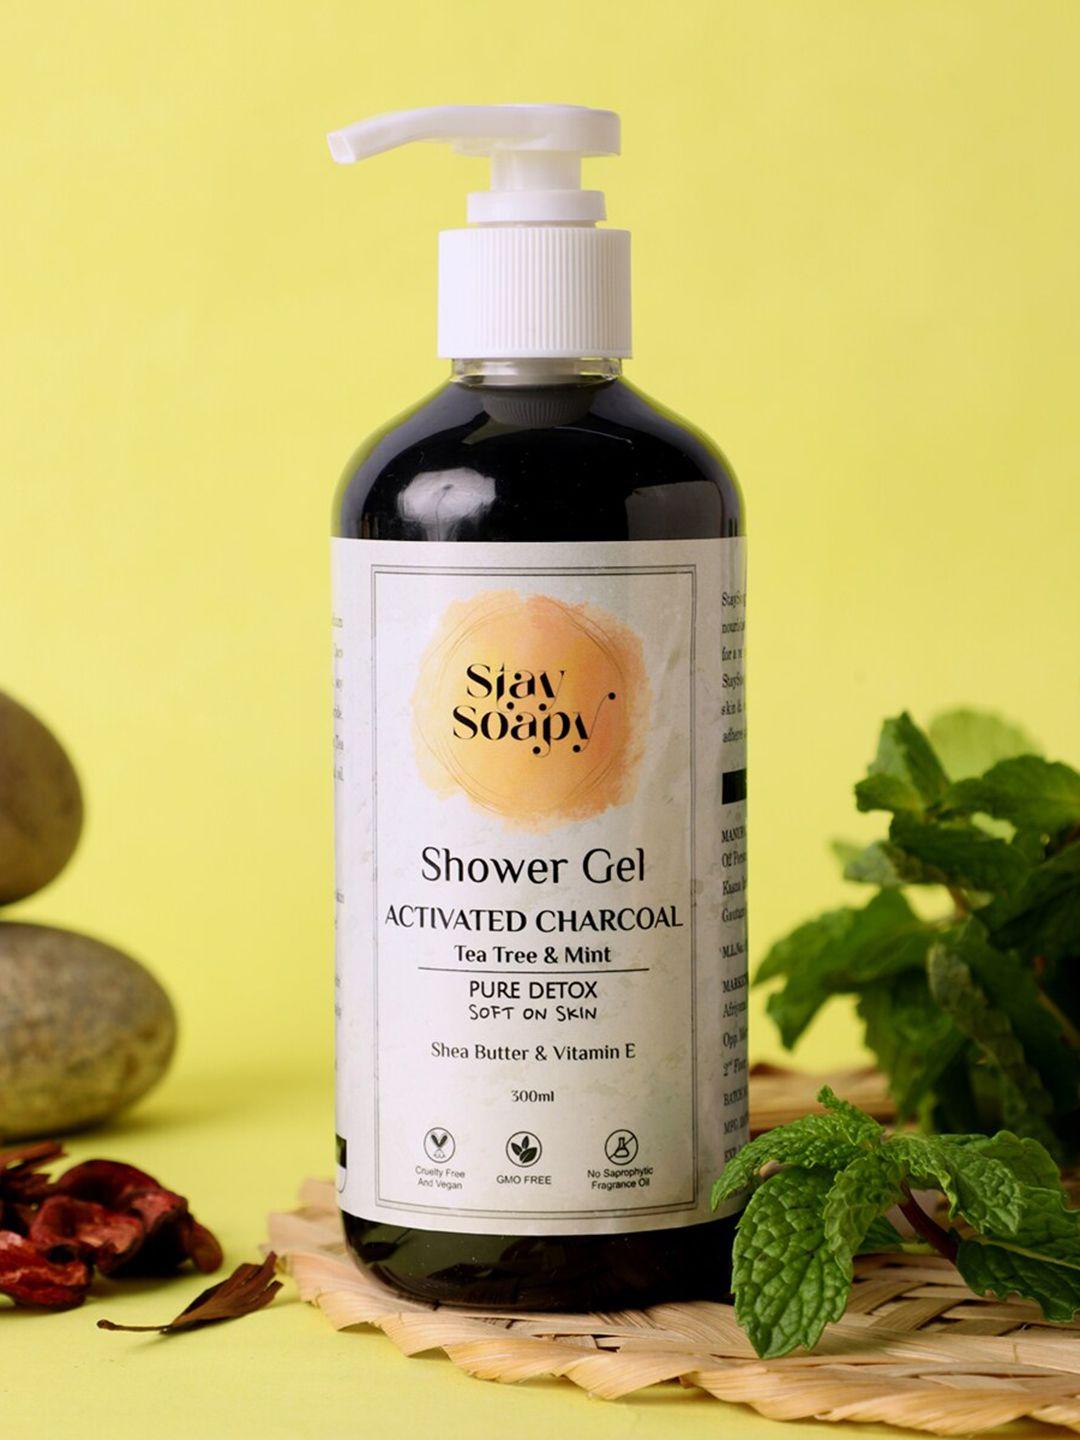 stay soapy set of 5 activated charcoal with tea tree & mint shower gel 300ml each